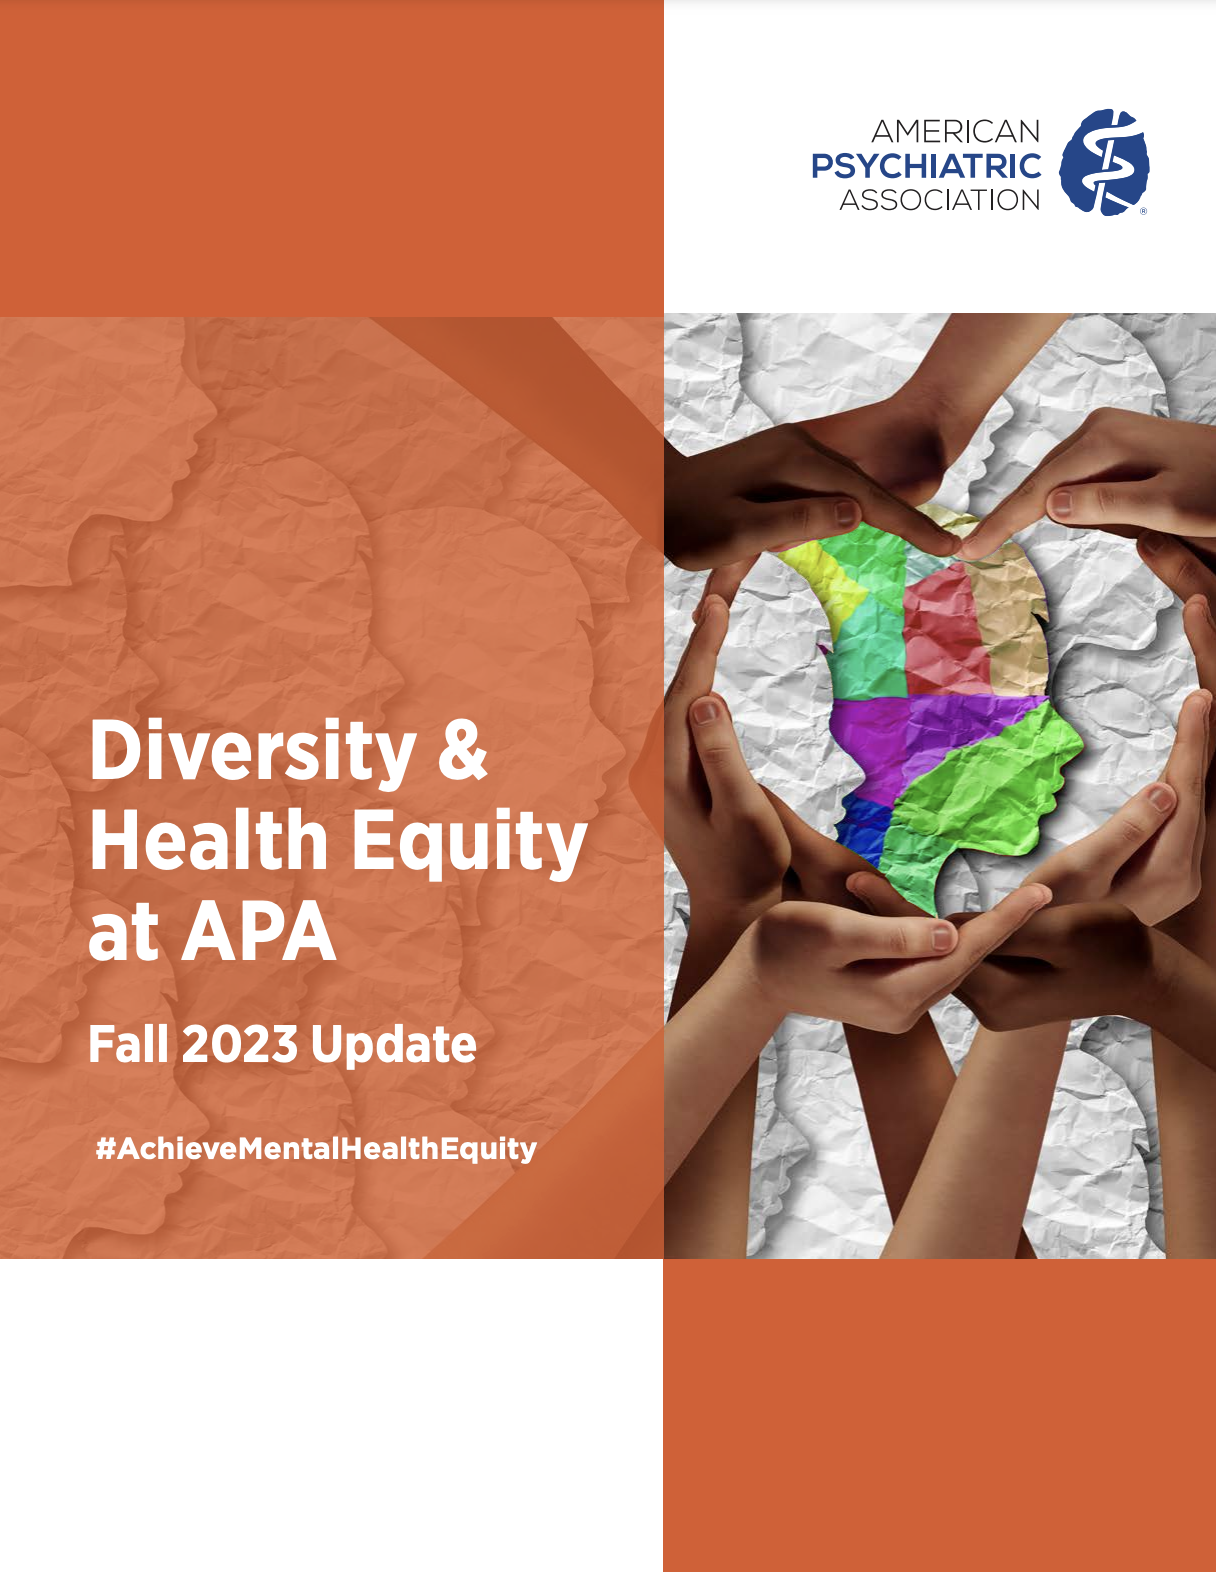 American Psychiatric Association Diversity and Health Equity at APA Fall 2023 Update